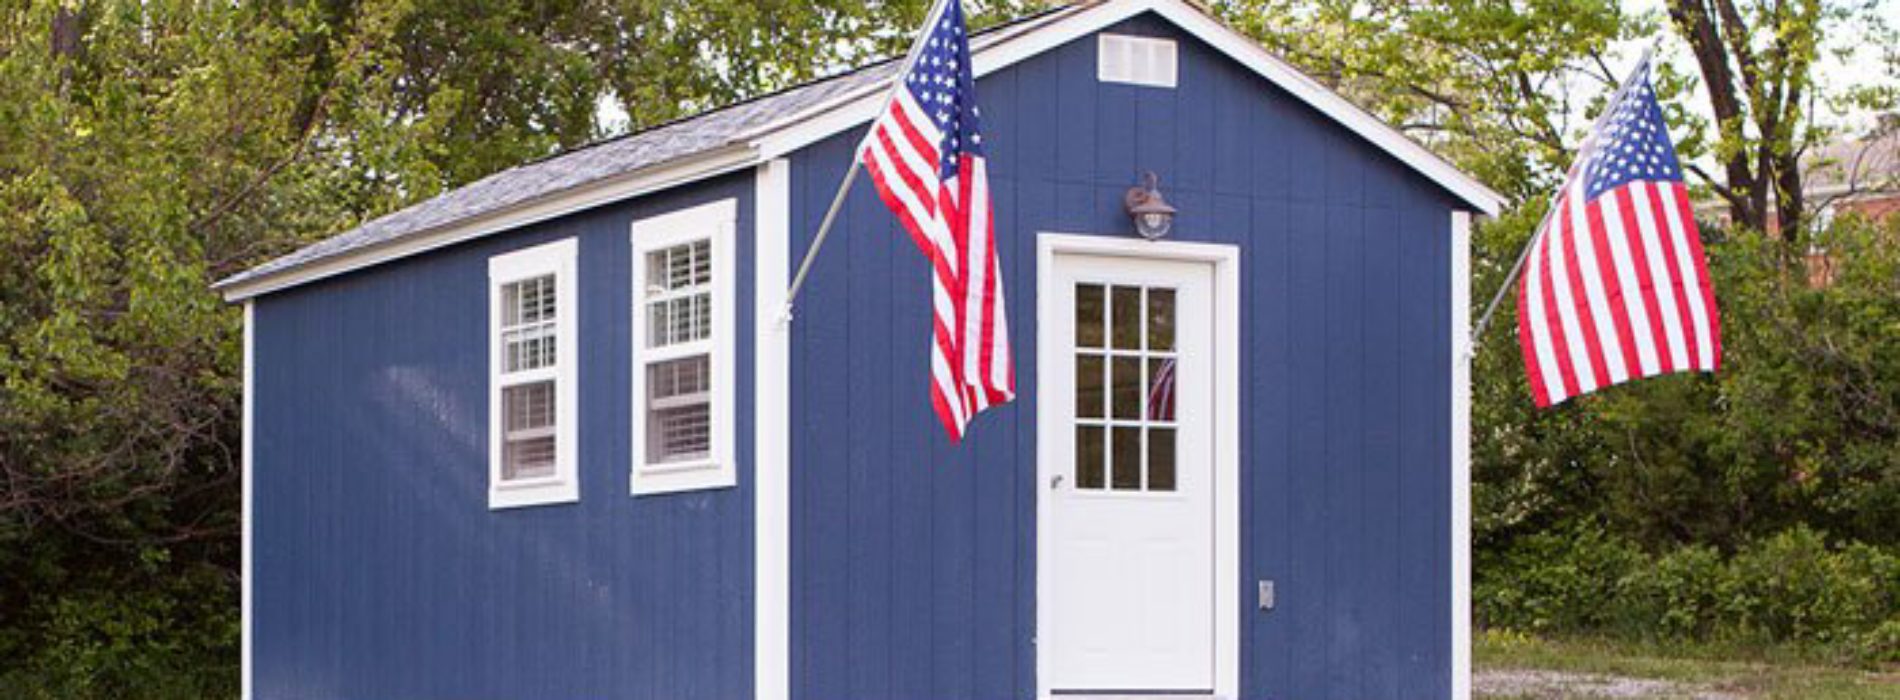 Episode #33: Helping homeless veterans, one tiny house at a time